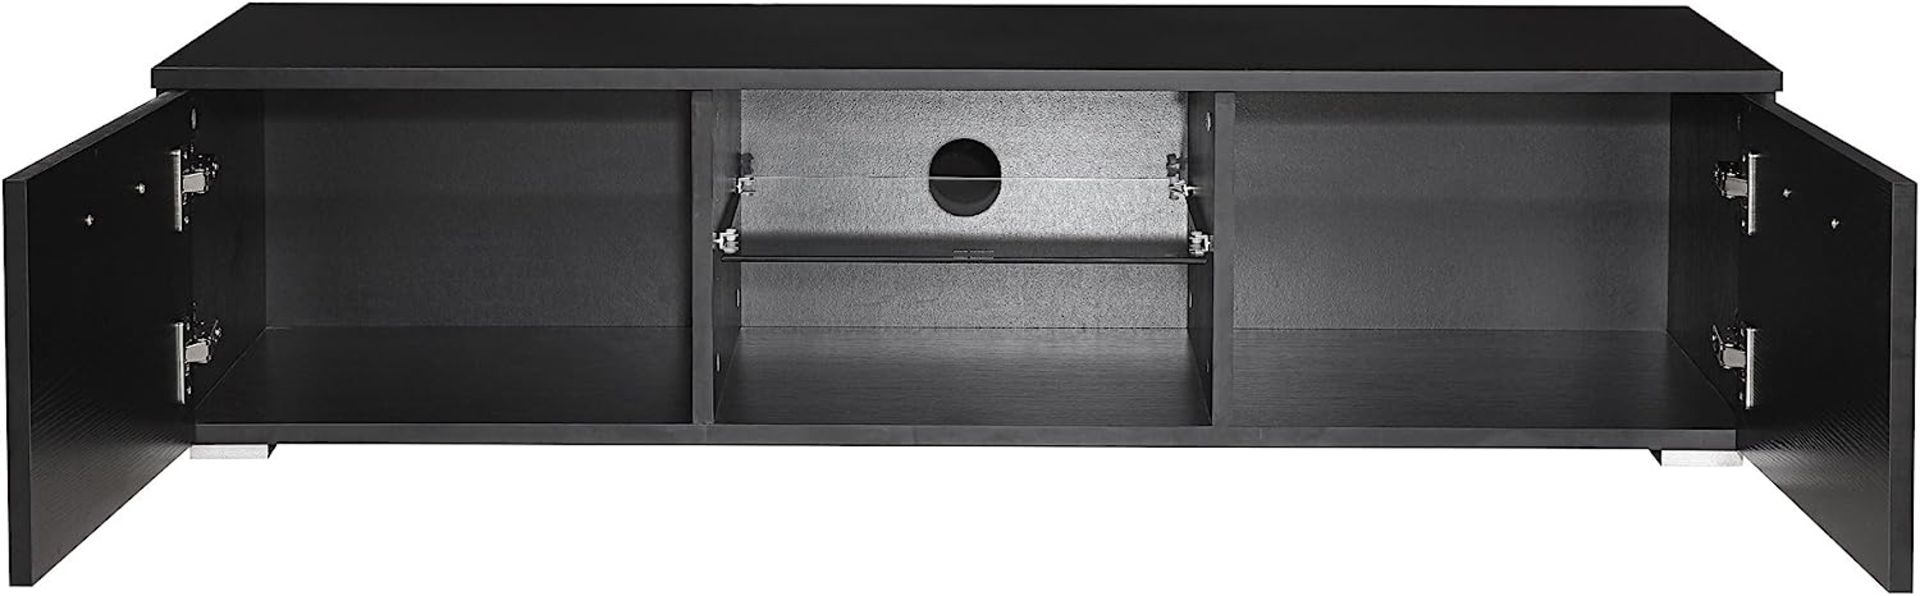 HARMIN MODERN 120CM TV STAND CABINET UNIT WITH HIGH GLOSS DOORS (BLACK ON BLACK) - Image 5 of 9